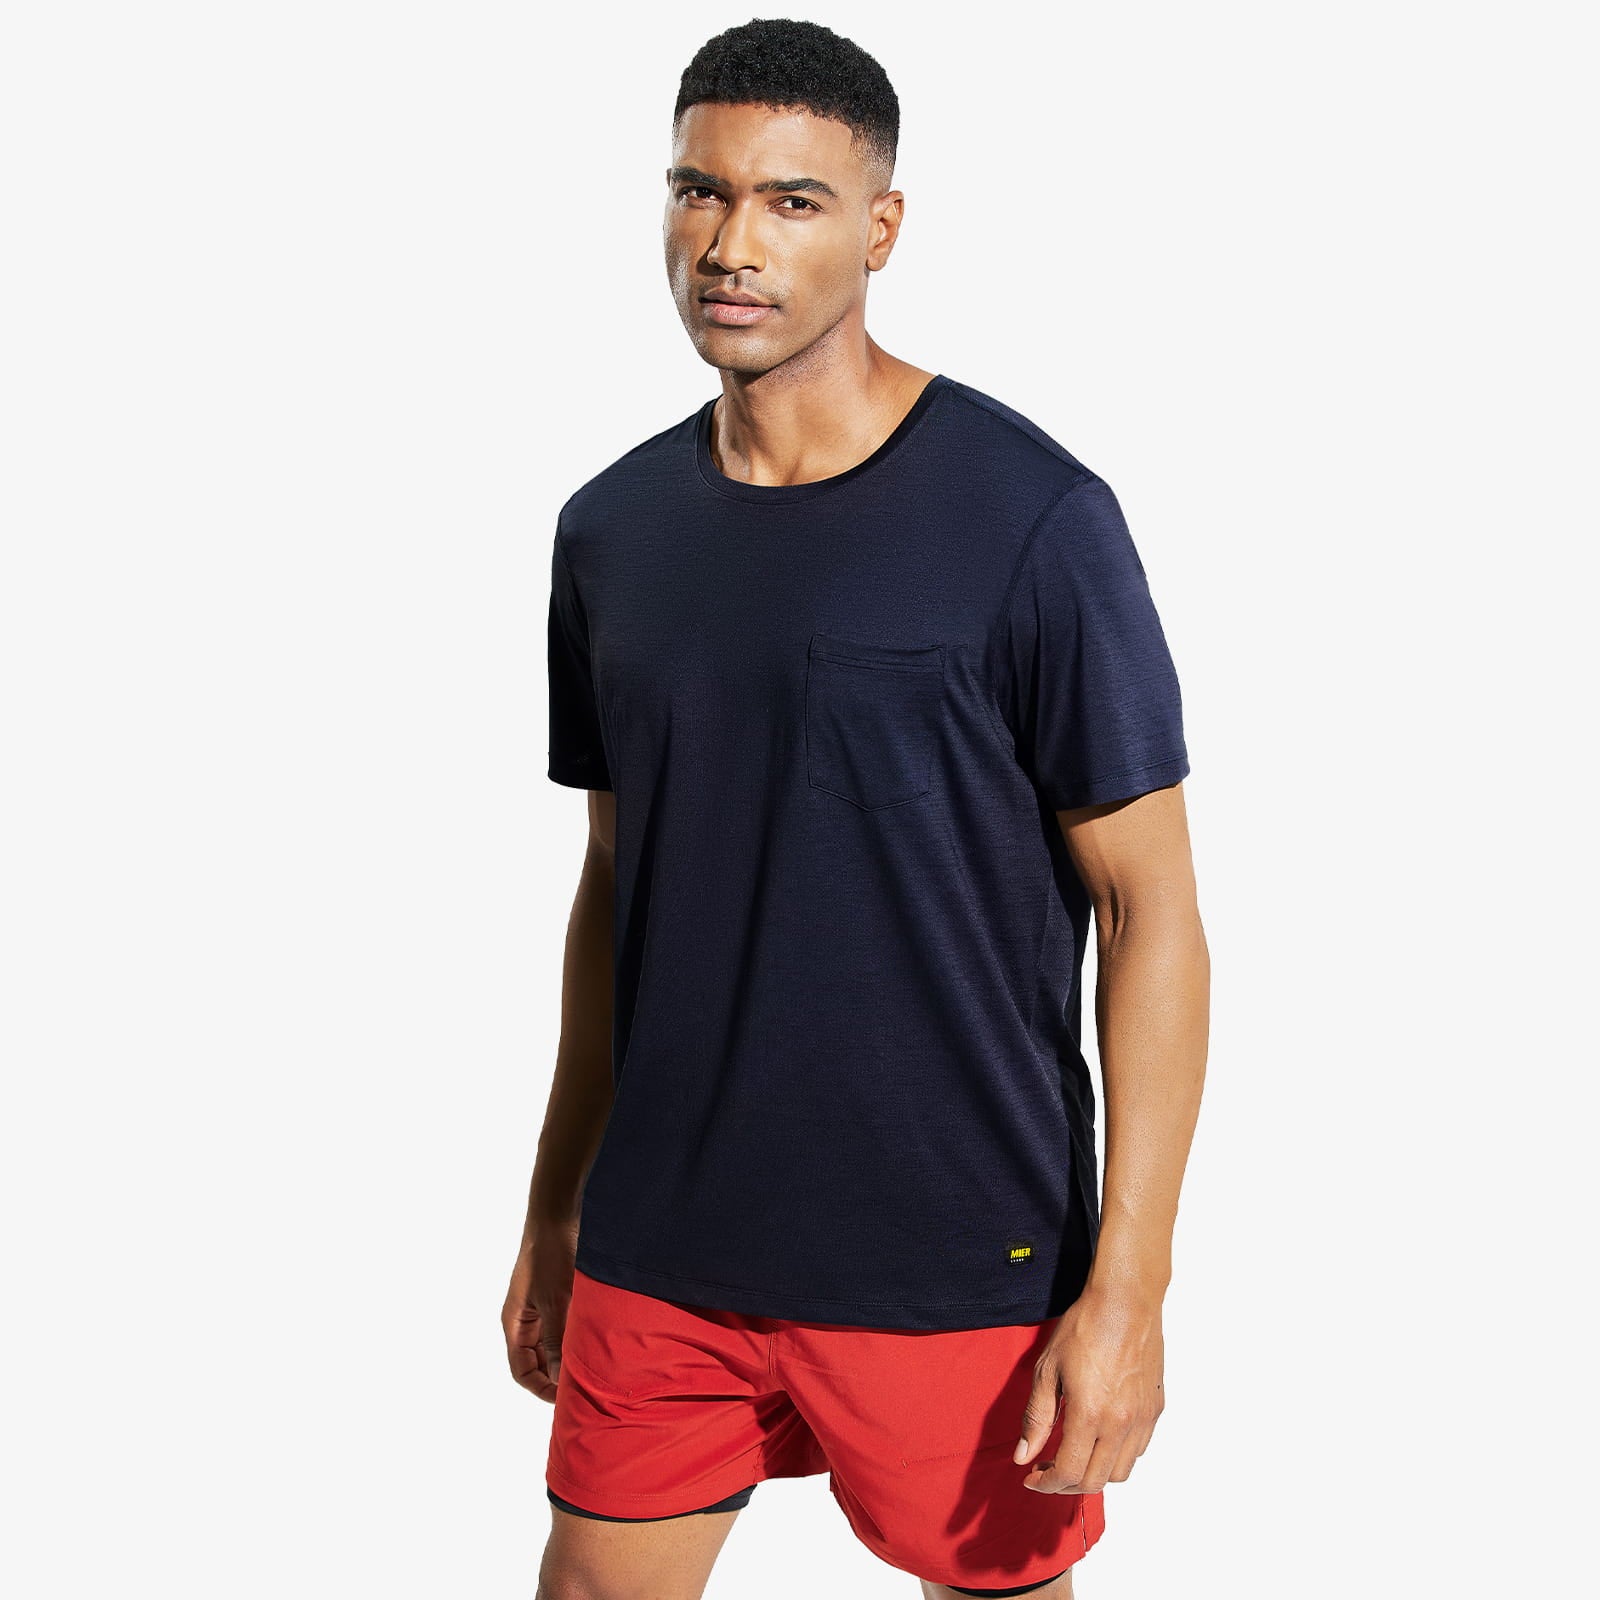 Men's Dry Fit Athletic T-Shirt with Pocket Men Shirts Dark Blue / S MIER